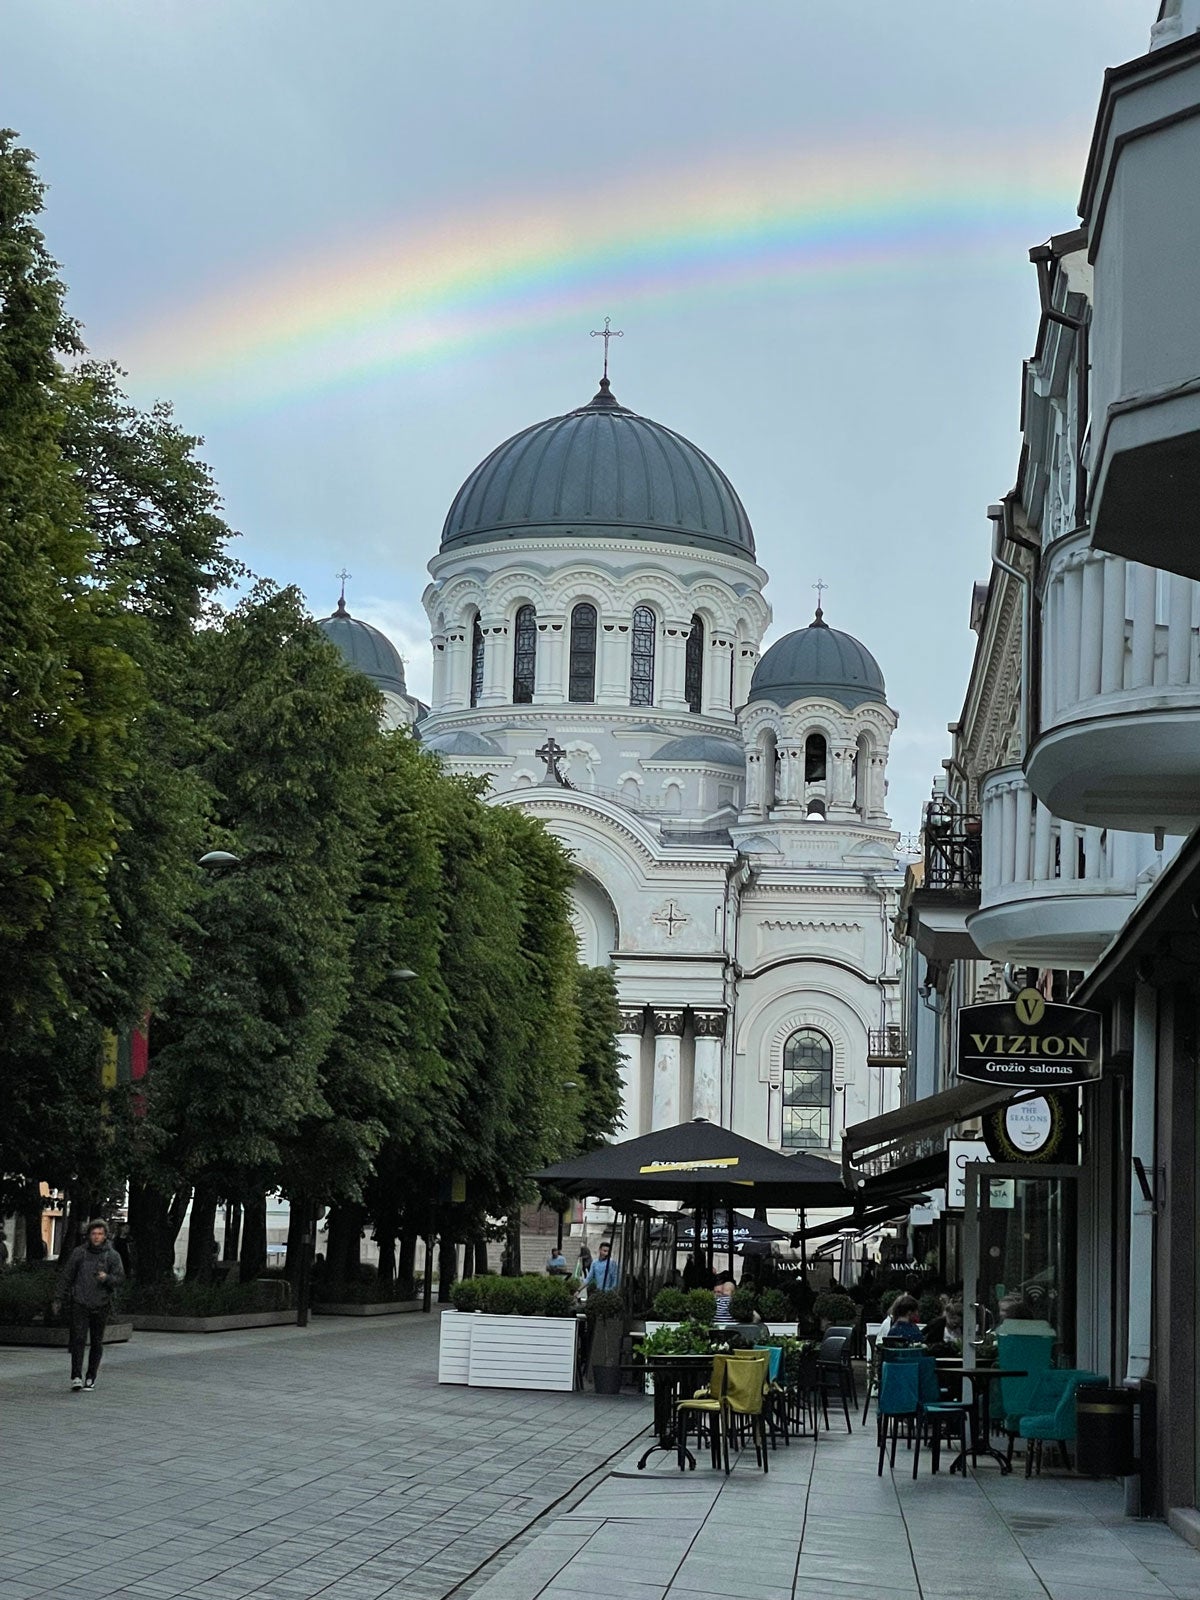 Church of Saint Michael the Archangel with rainbow in background